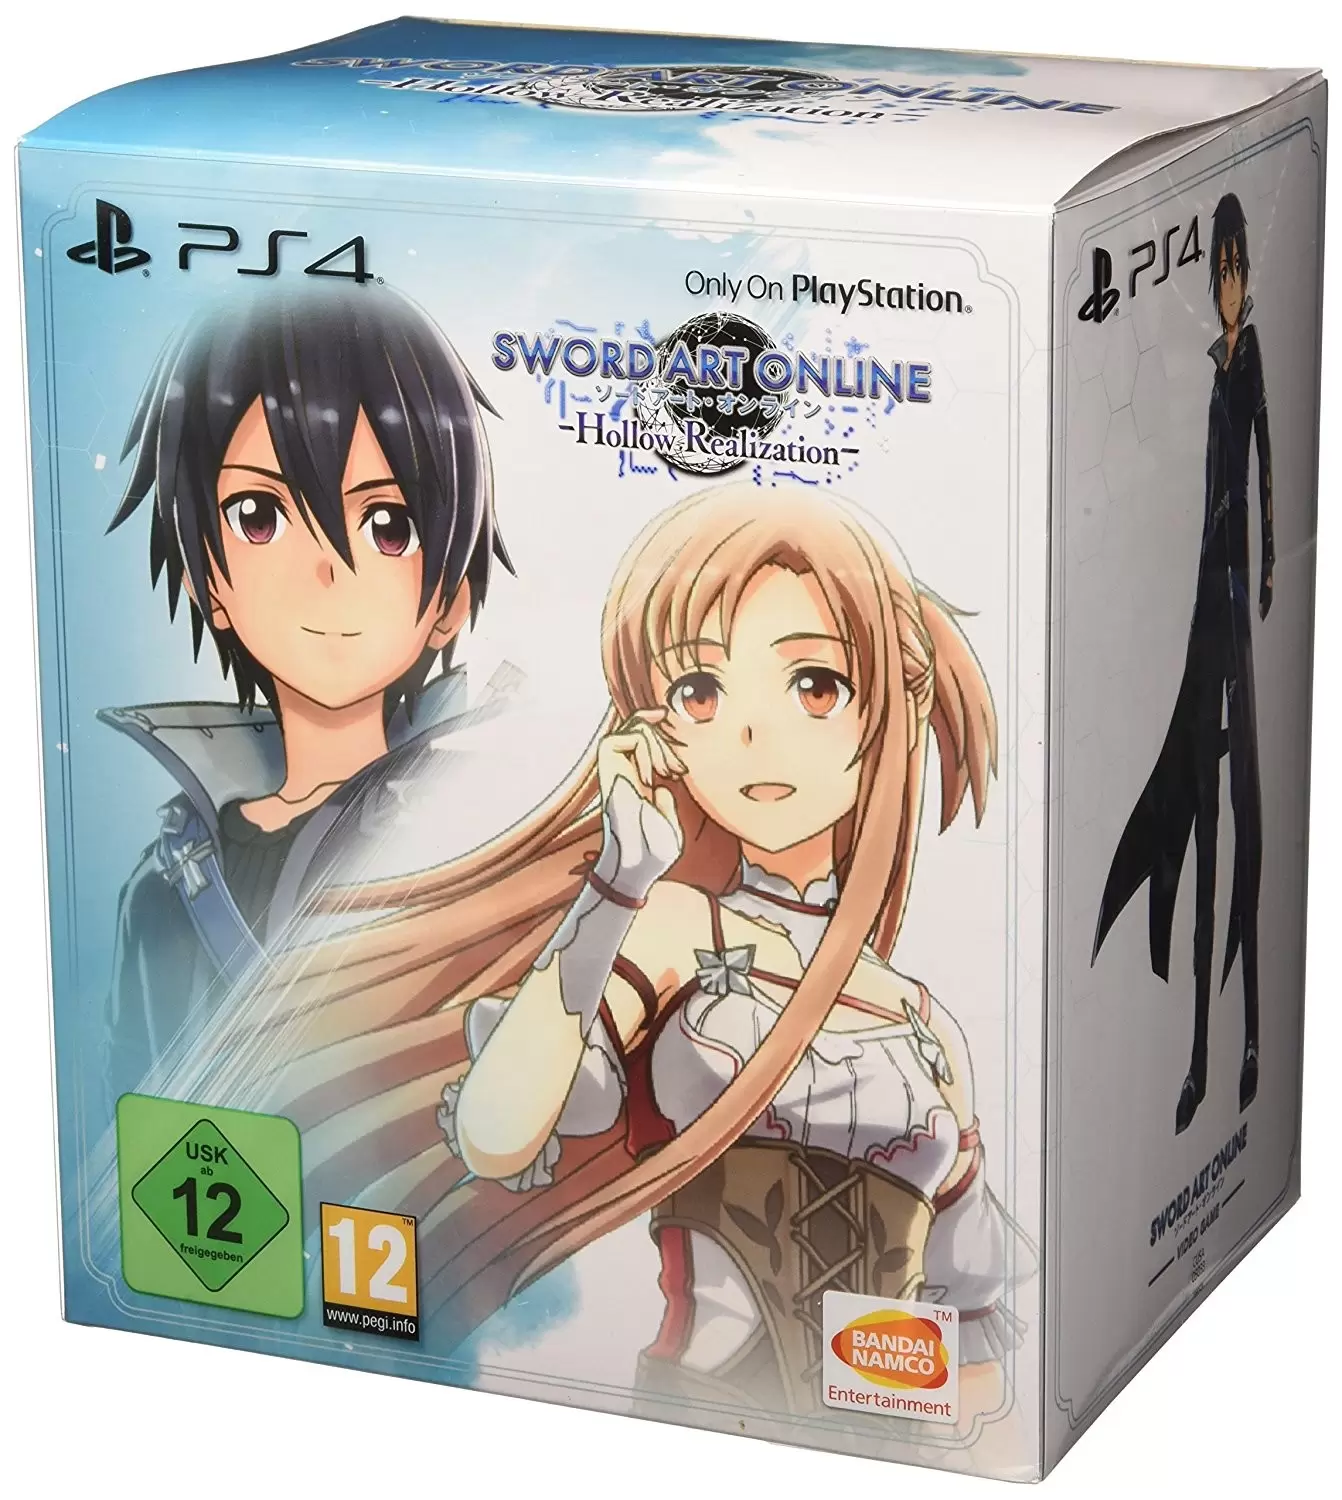 PS4 Games - Sword Art Online Hollow Realization - Collector Edition